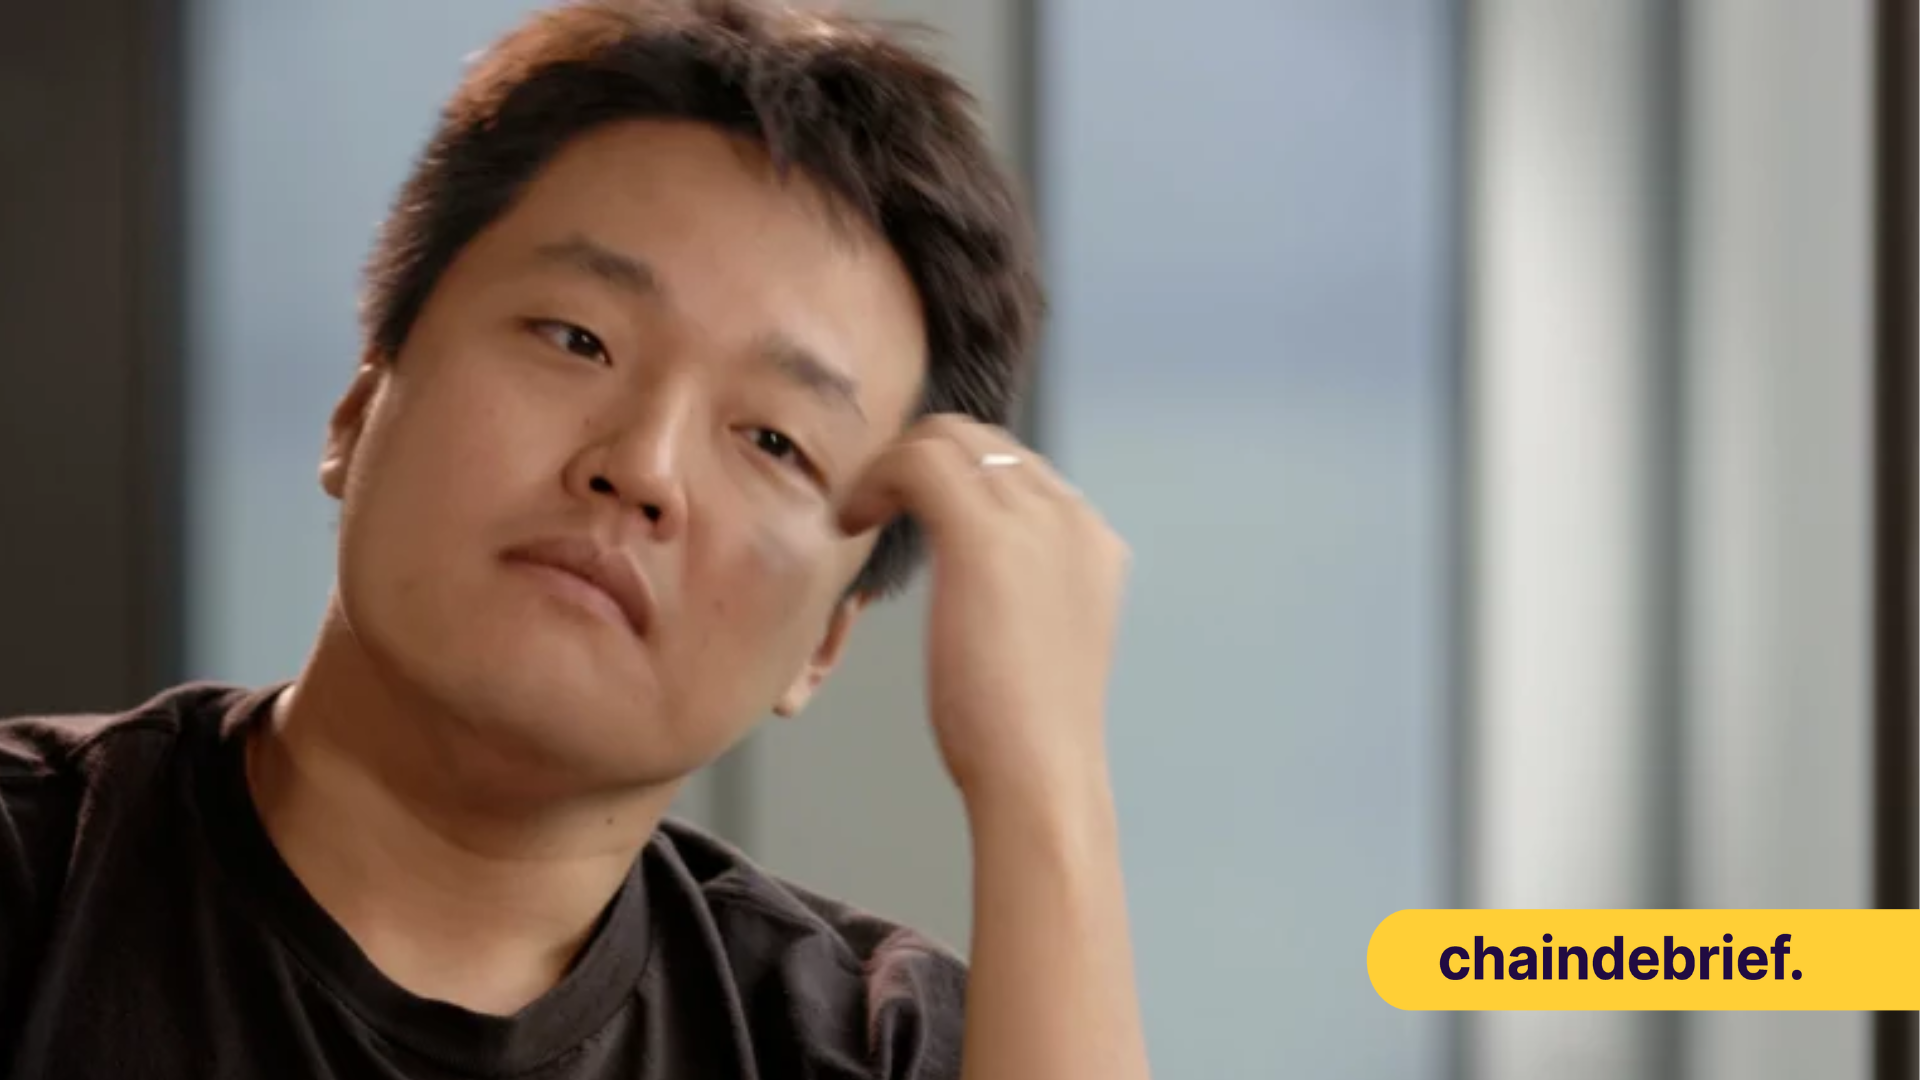 SEC Sues Do Kwon, Claims He Cashed Out $100M in Bitcoin From Luna Foundation Guard